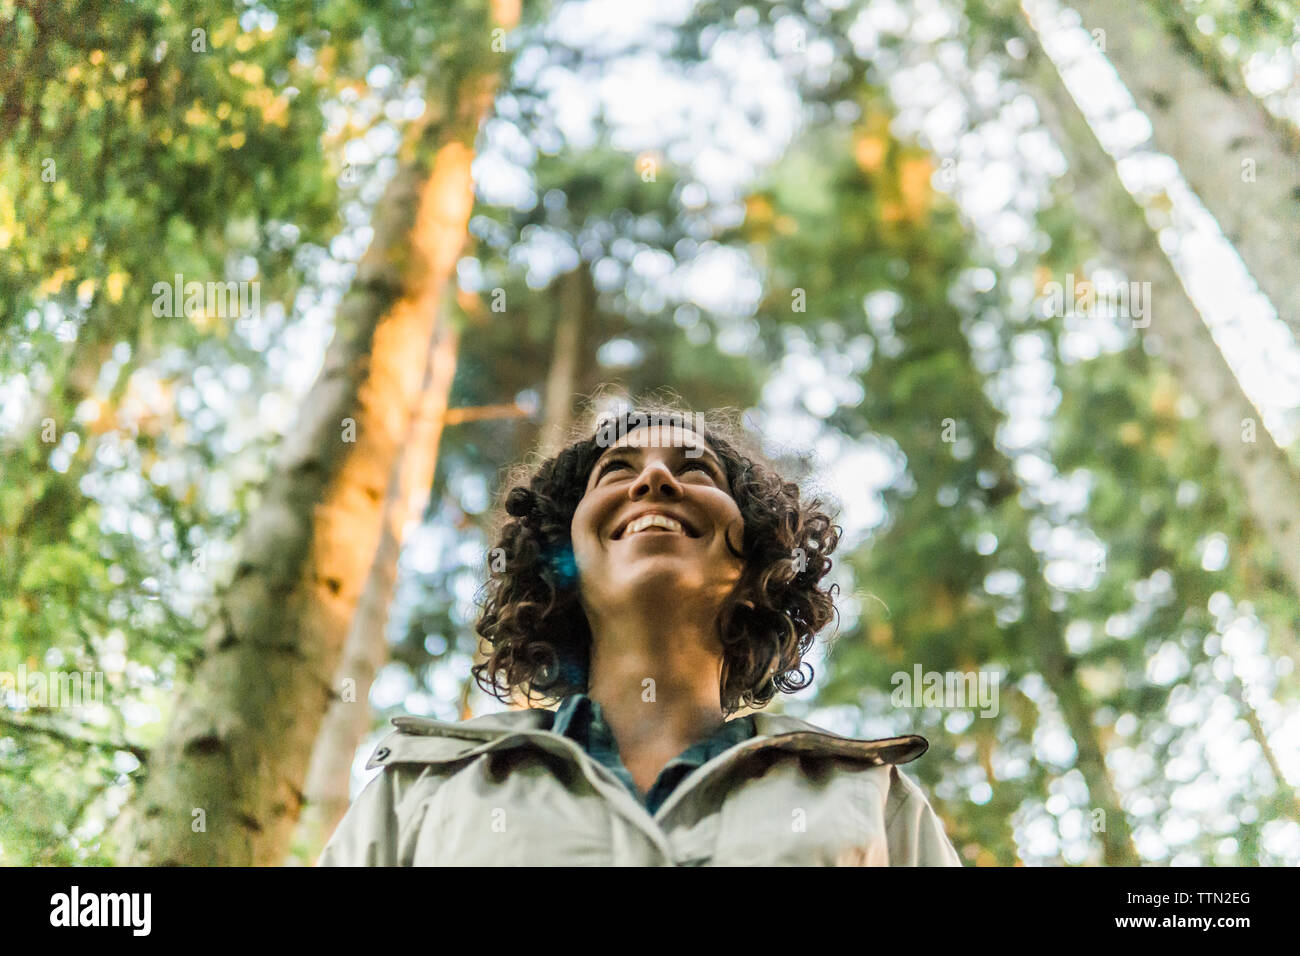 Low angle view of happy woman looking away while standing in forest Banque D'Images